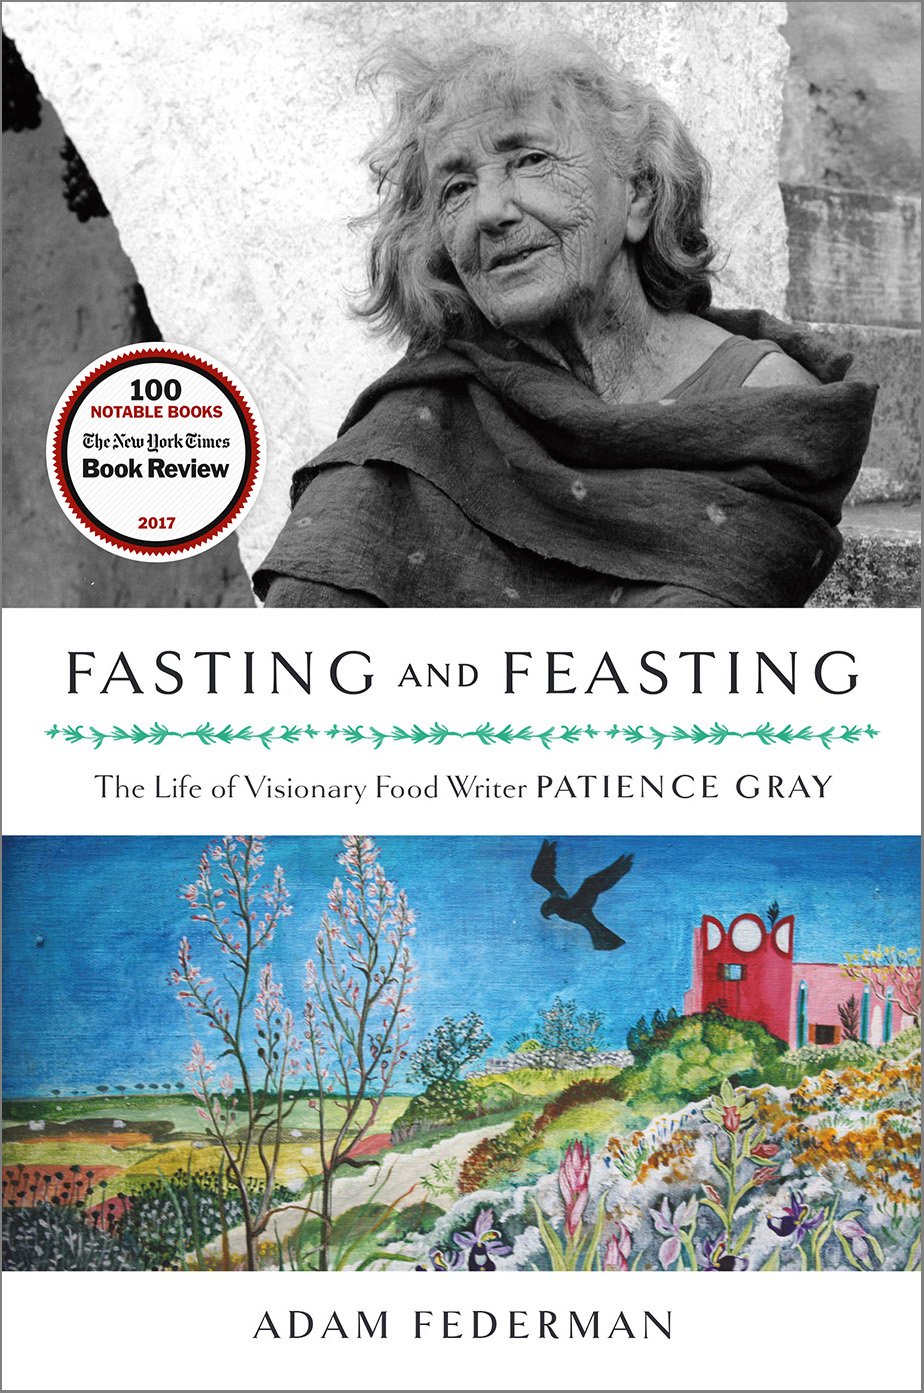 The Fasting and Feasting cover